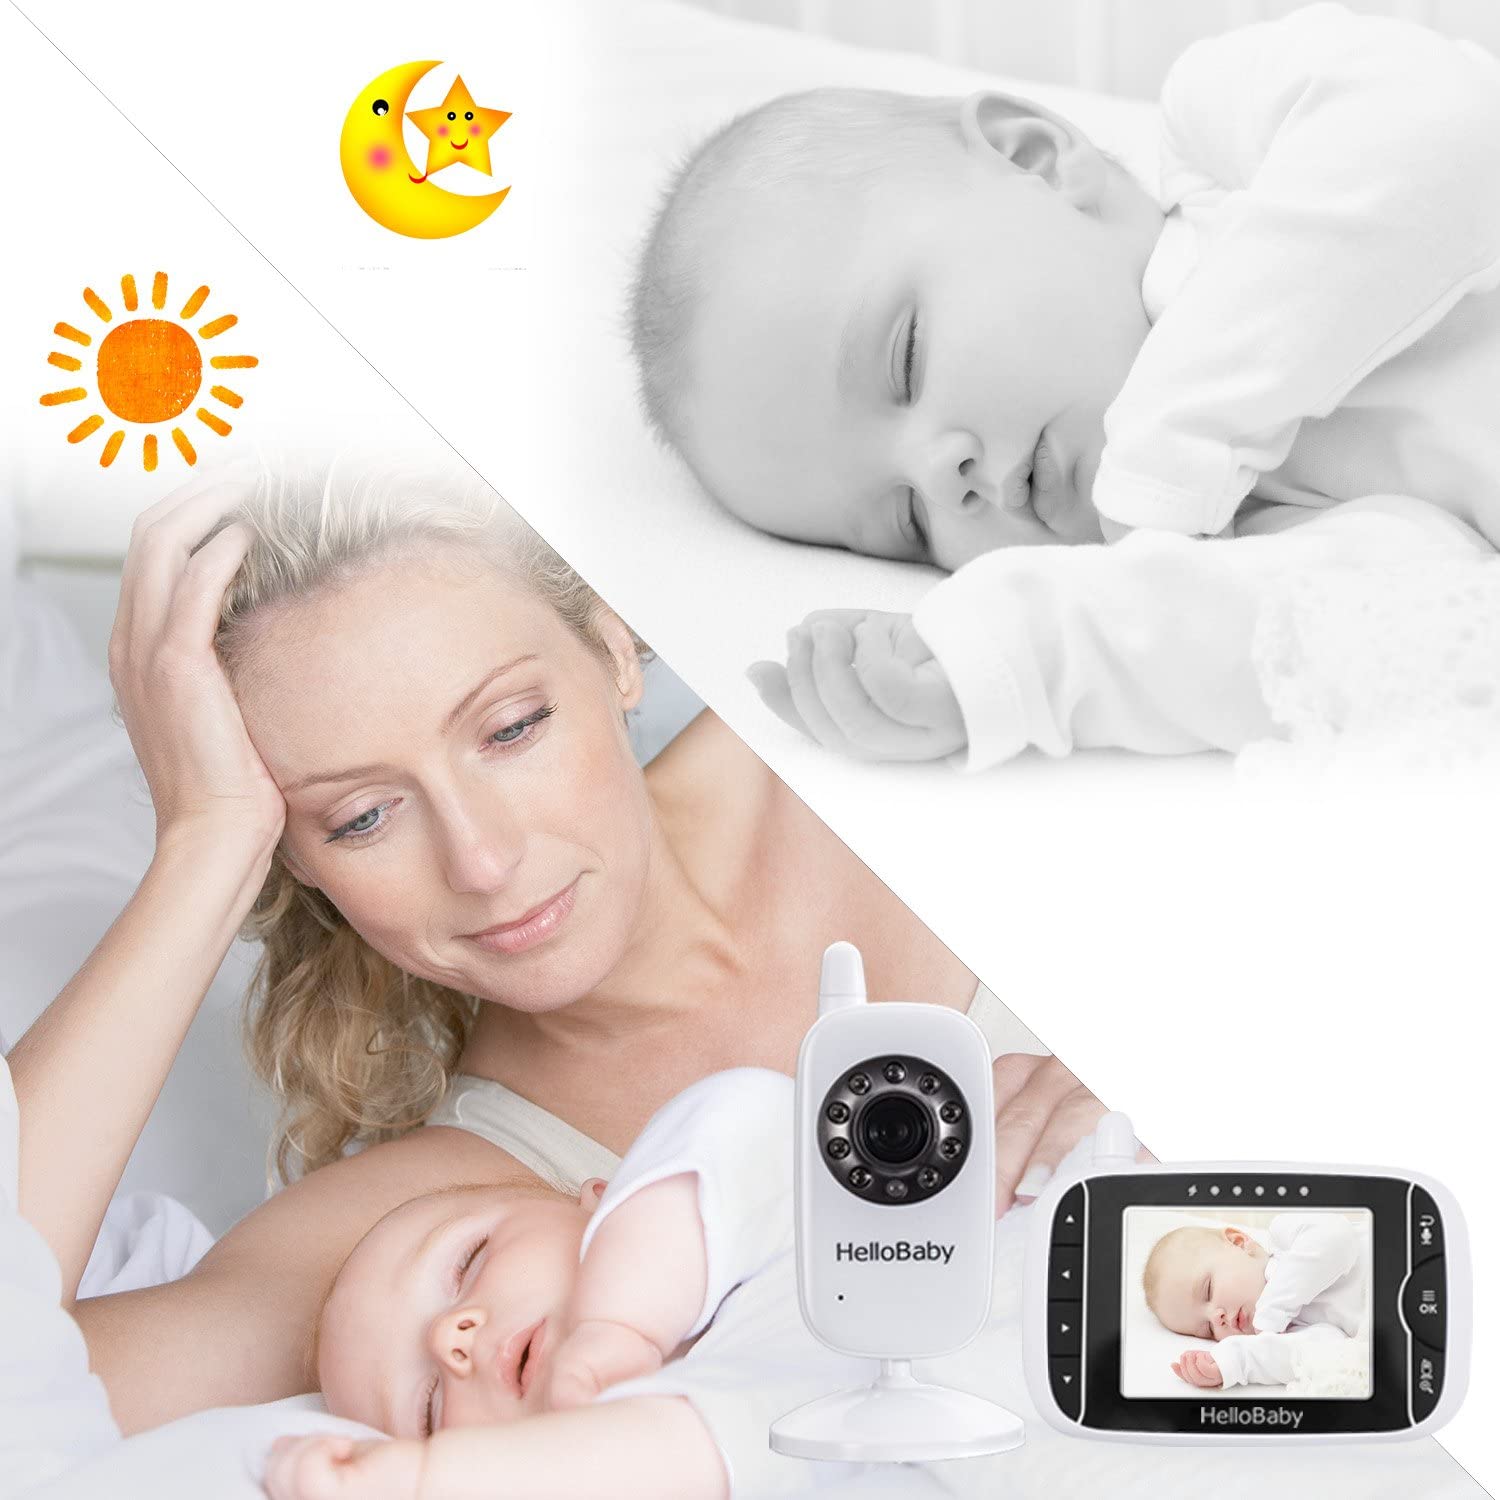 HelloBaby HB32 Digital Wireless Video Baby Monitor With Night